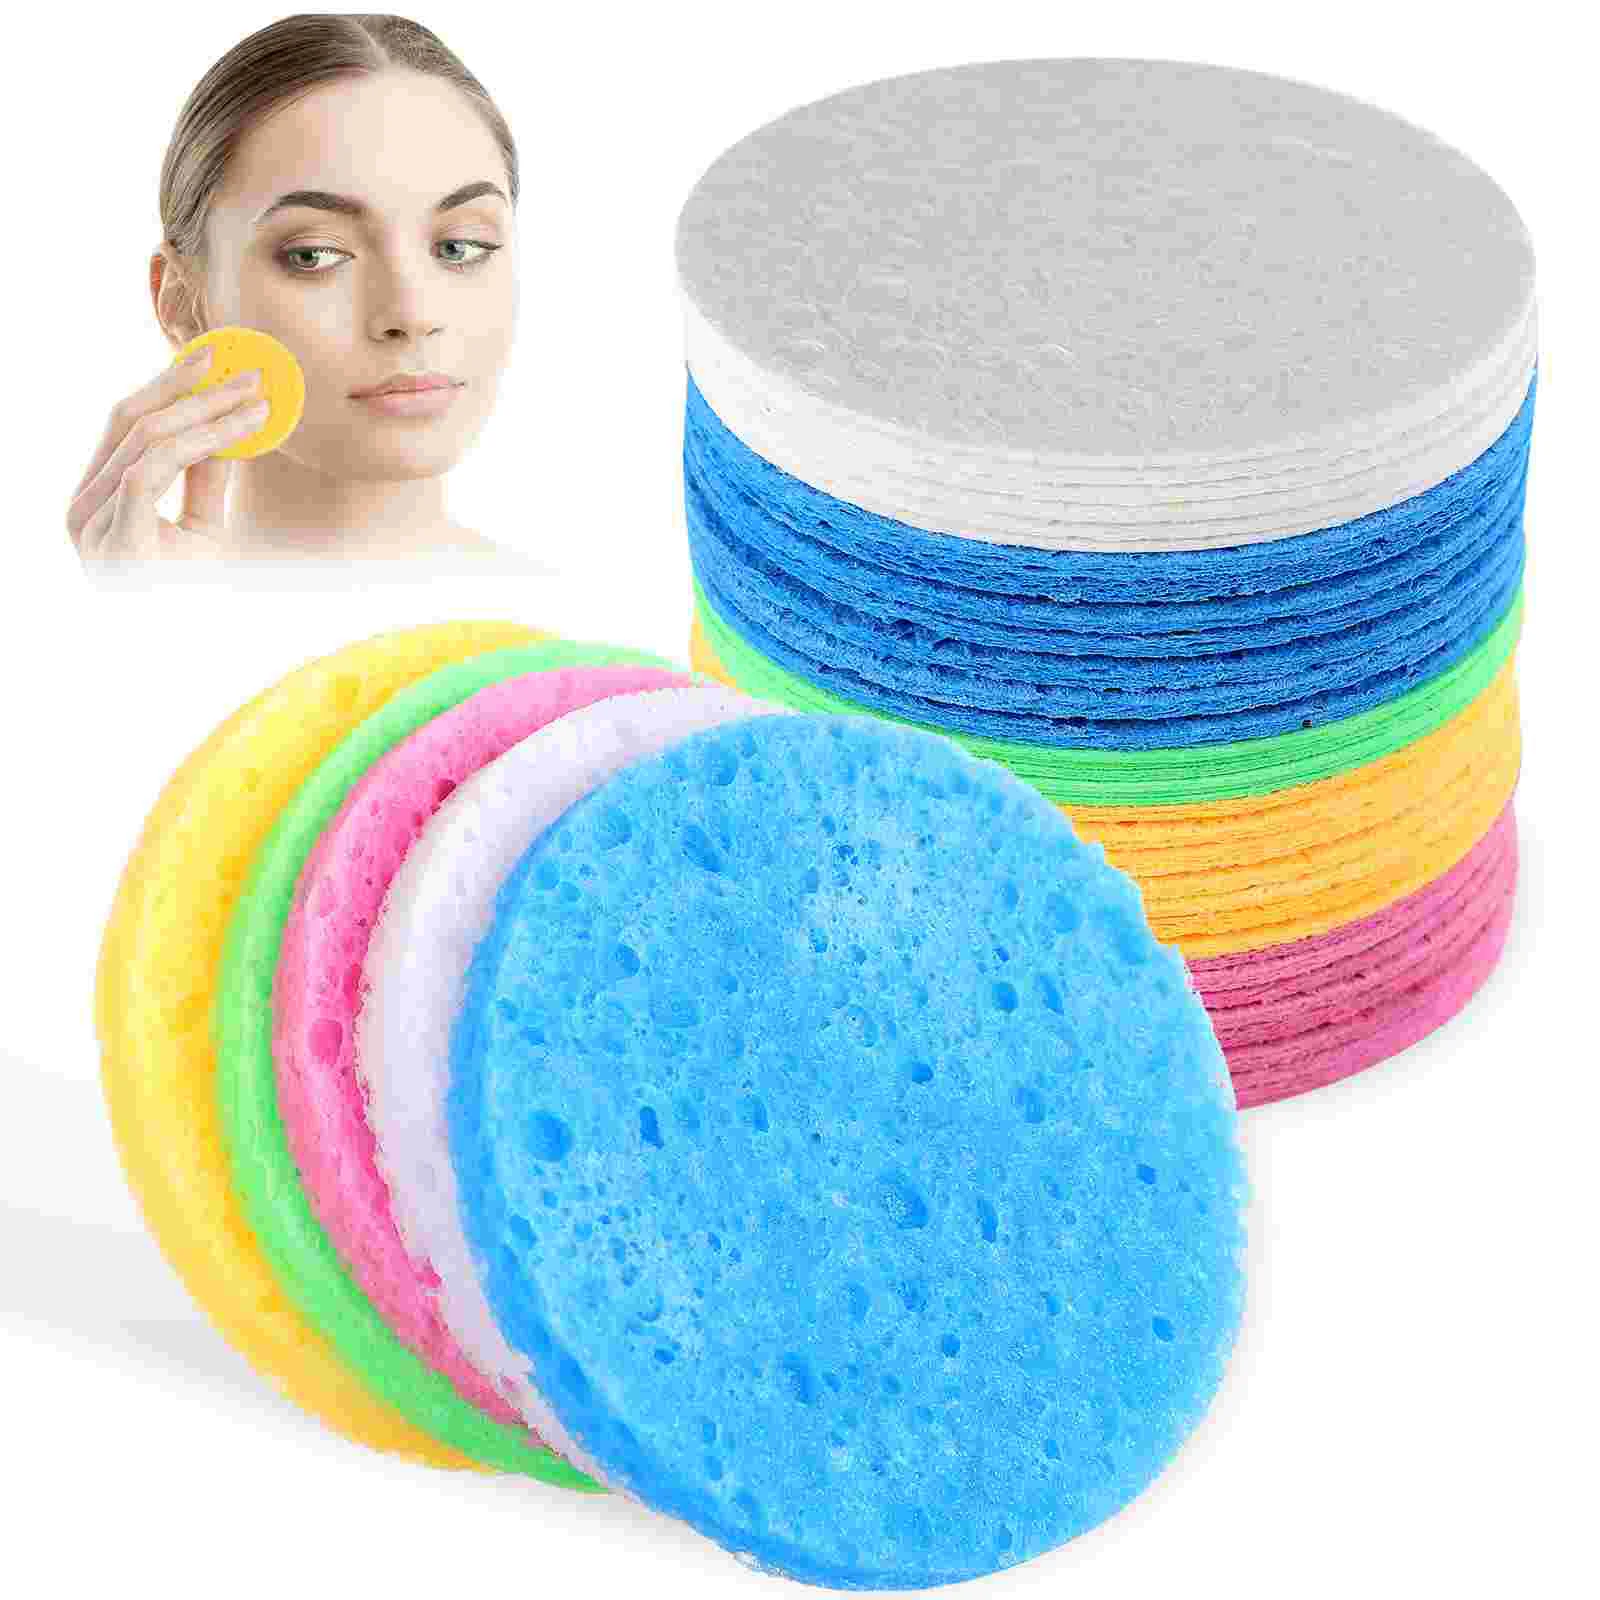 50 Pcs Face Scrubber Wash Sponge Natural Cleaner Brush Cleaners Loofah Reusable Cleansing Powder Puffs Exfoliator